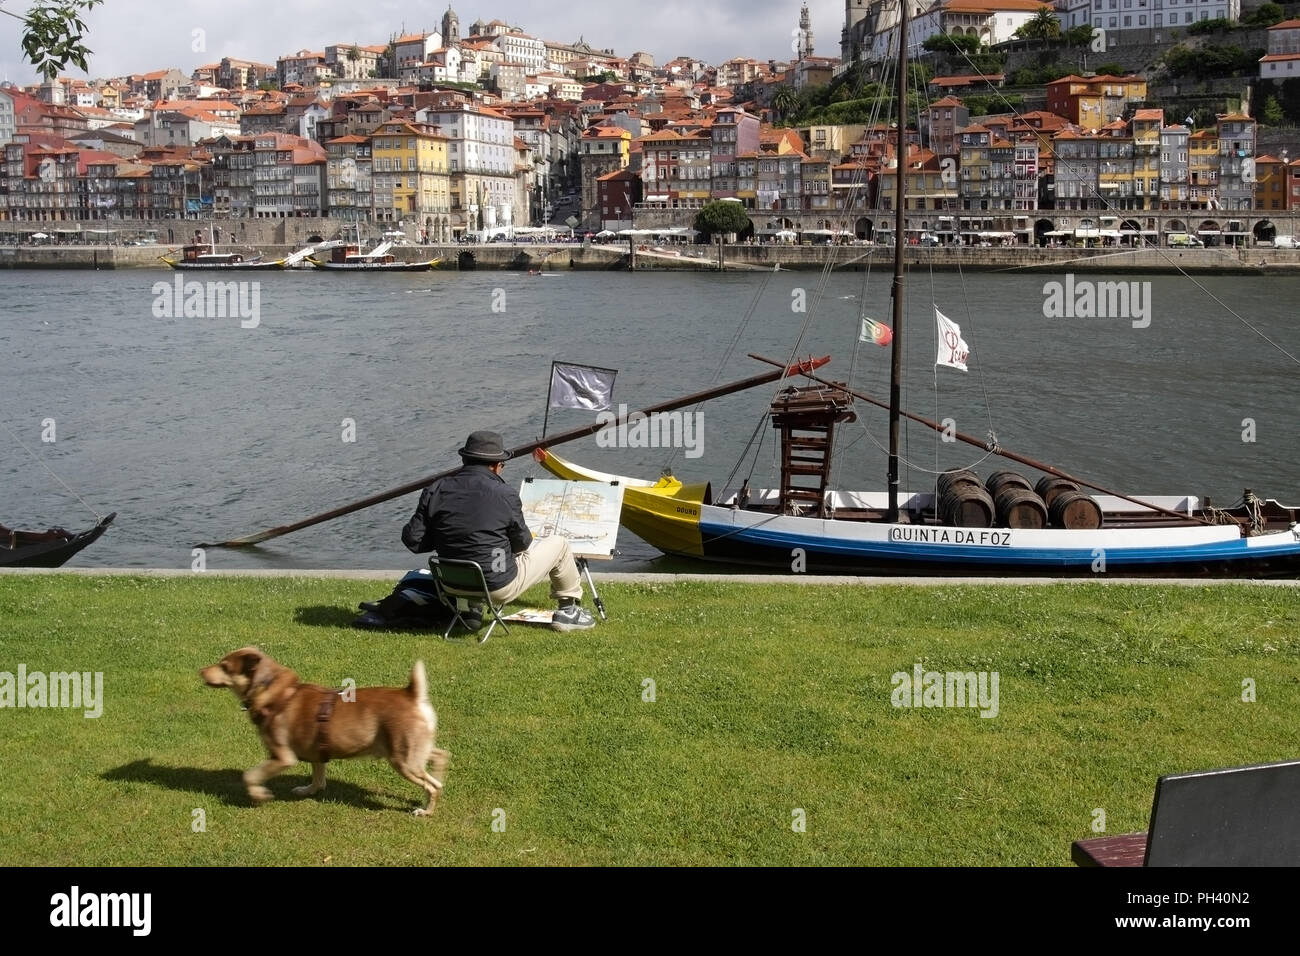 Porto, Portugal - May 26, 2012: Ribeira do Porto as seen from the opposite bank of the Douro River, the twin city of Vila Nova de Gaia, seeing in the  Stock Photo